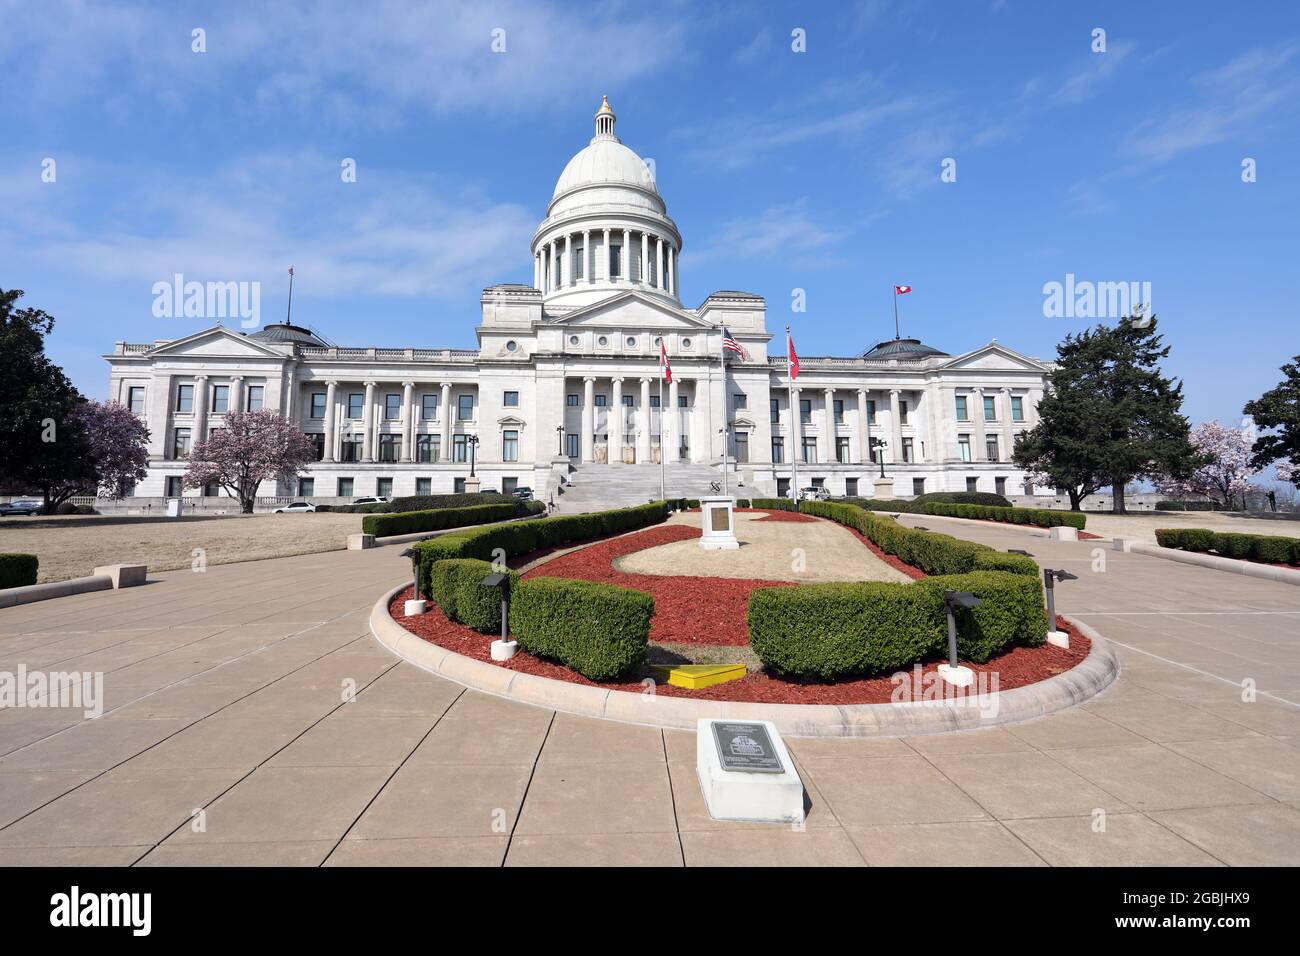 Geographie / Reisen, USA, Arkansas, Little Rock, State Capitol, Little Rock, Arkansas, ADDITIONAL-RIGHTS-CLEARANCE-INFO-NOT-AVAILABLE Stockfoto